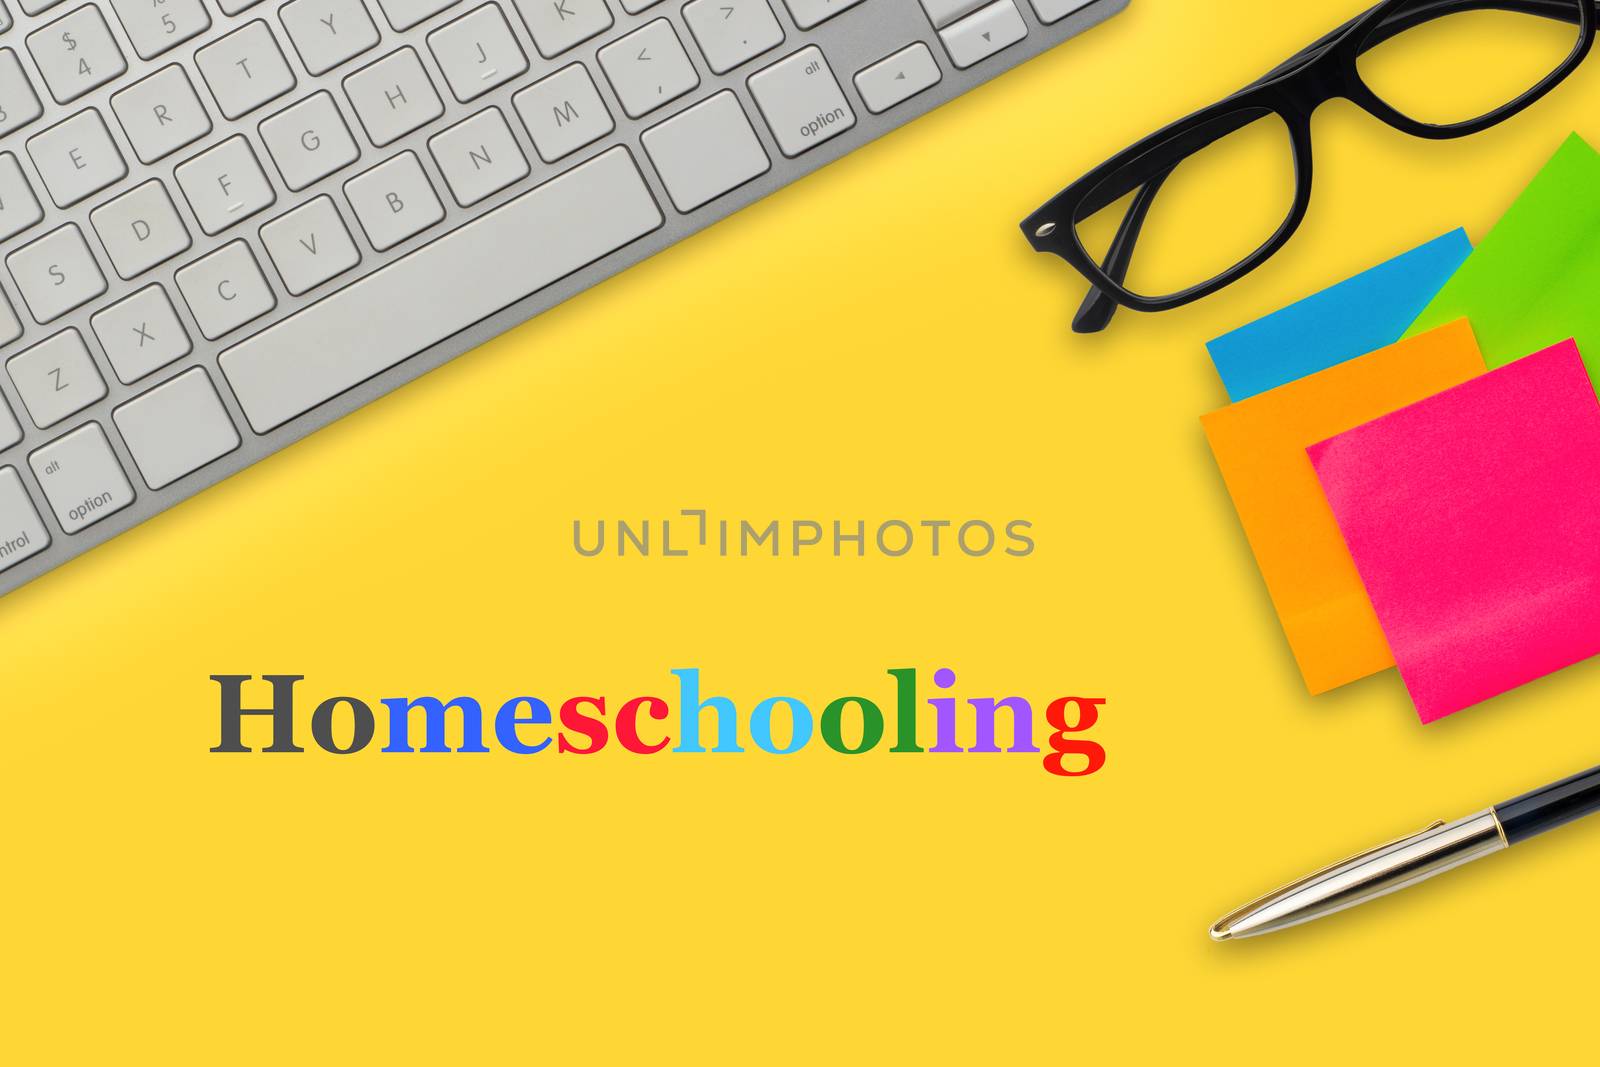 HOMESCHOOLING text with computer keyboard, eyeglasses, sticky notes and fountain pen on yellow background by silverwings